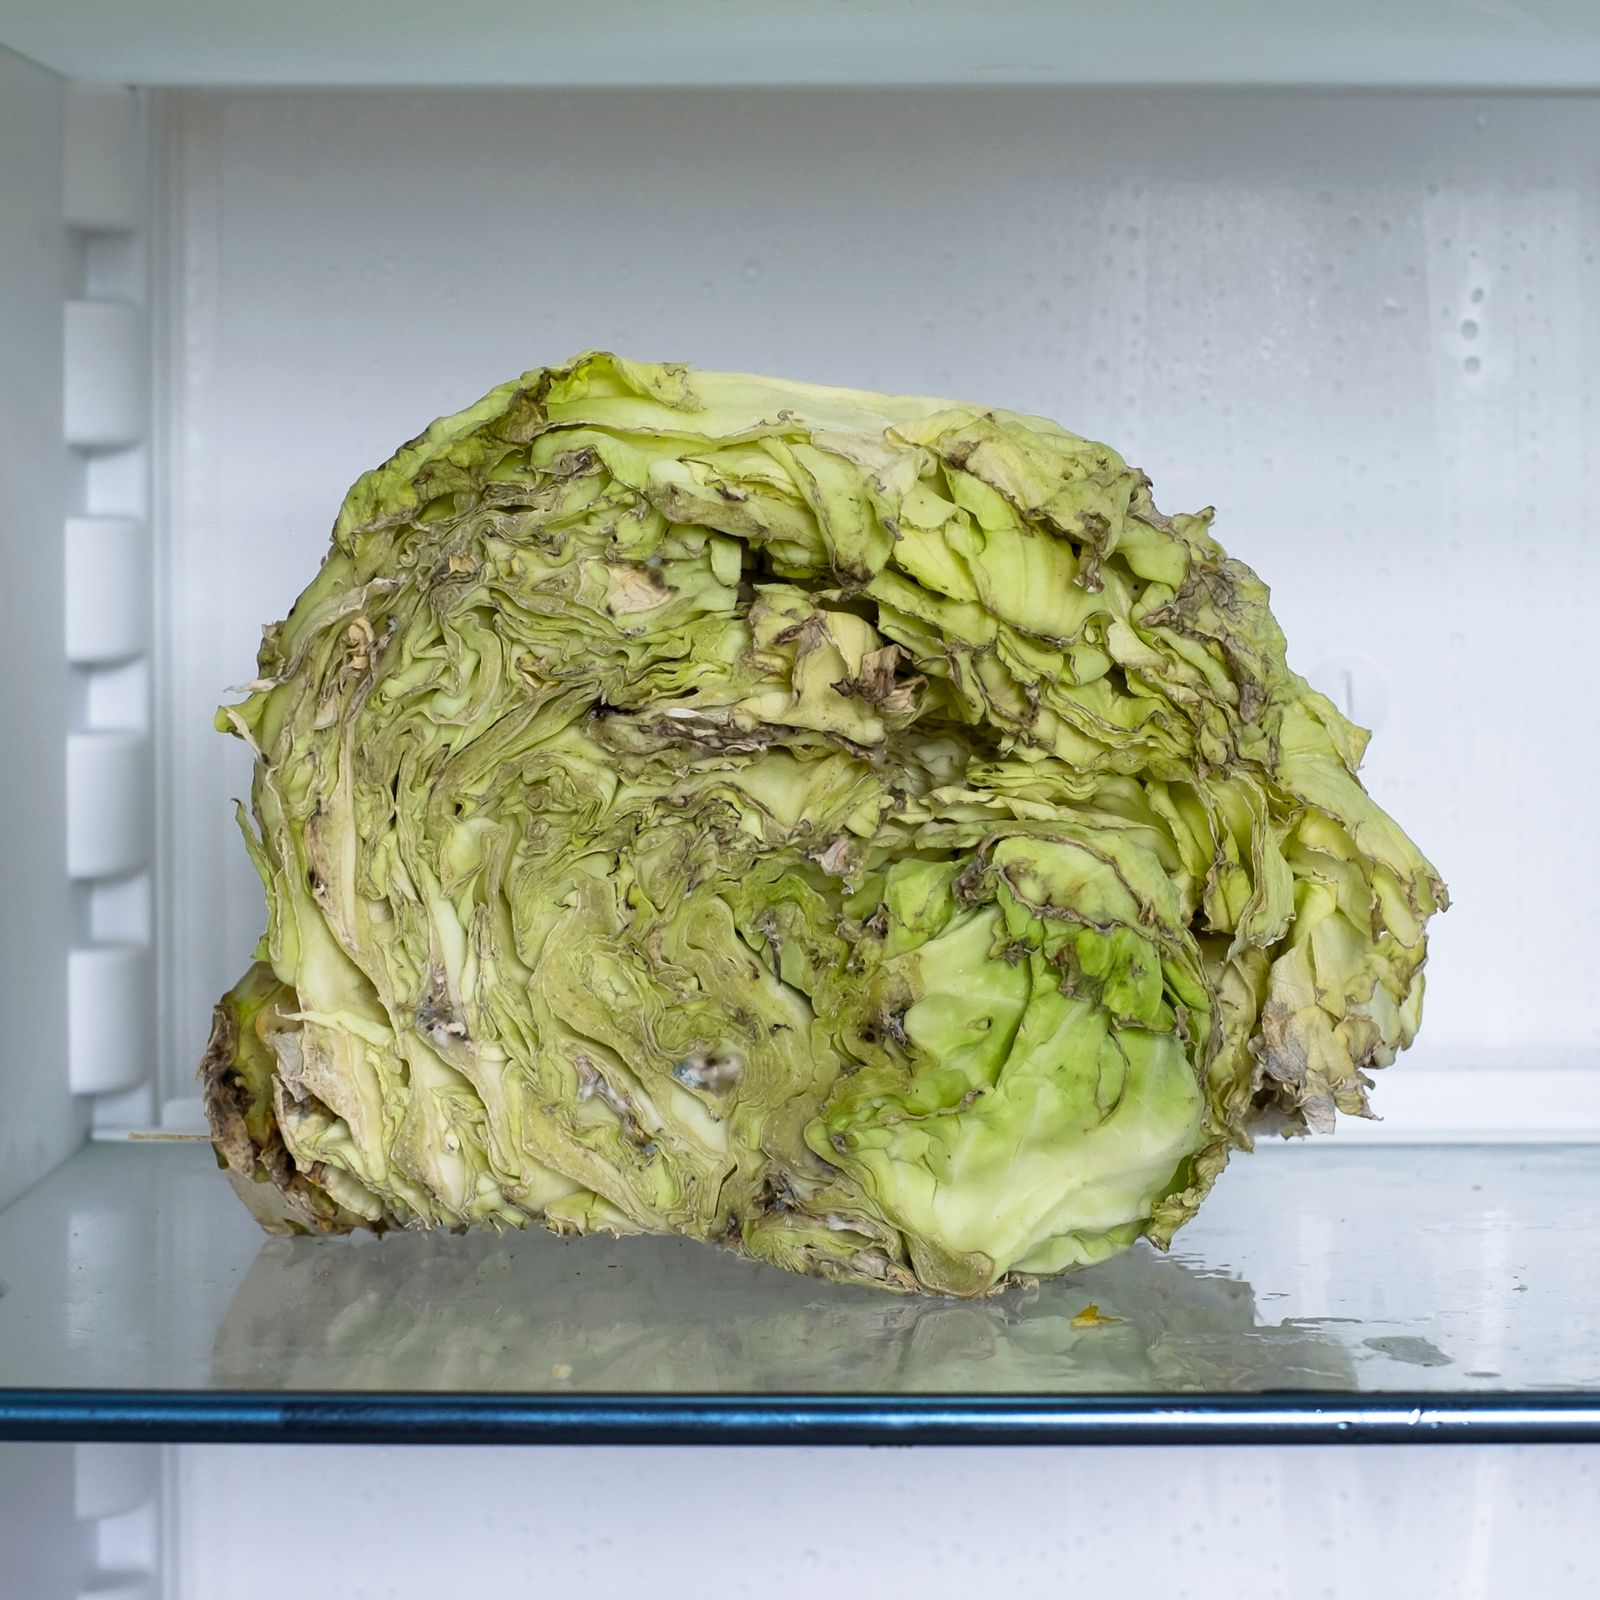 © Maria Quigley - A cabbage in the fridge. The cabbage was cooked a few days later.